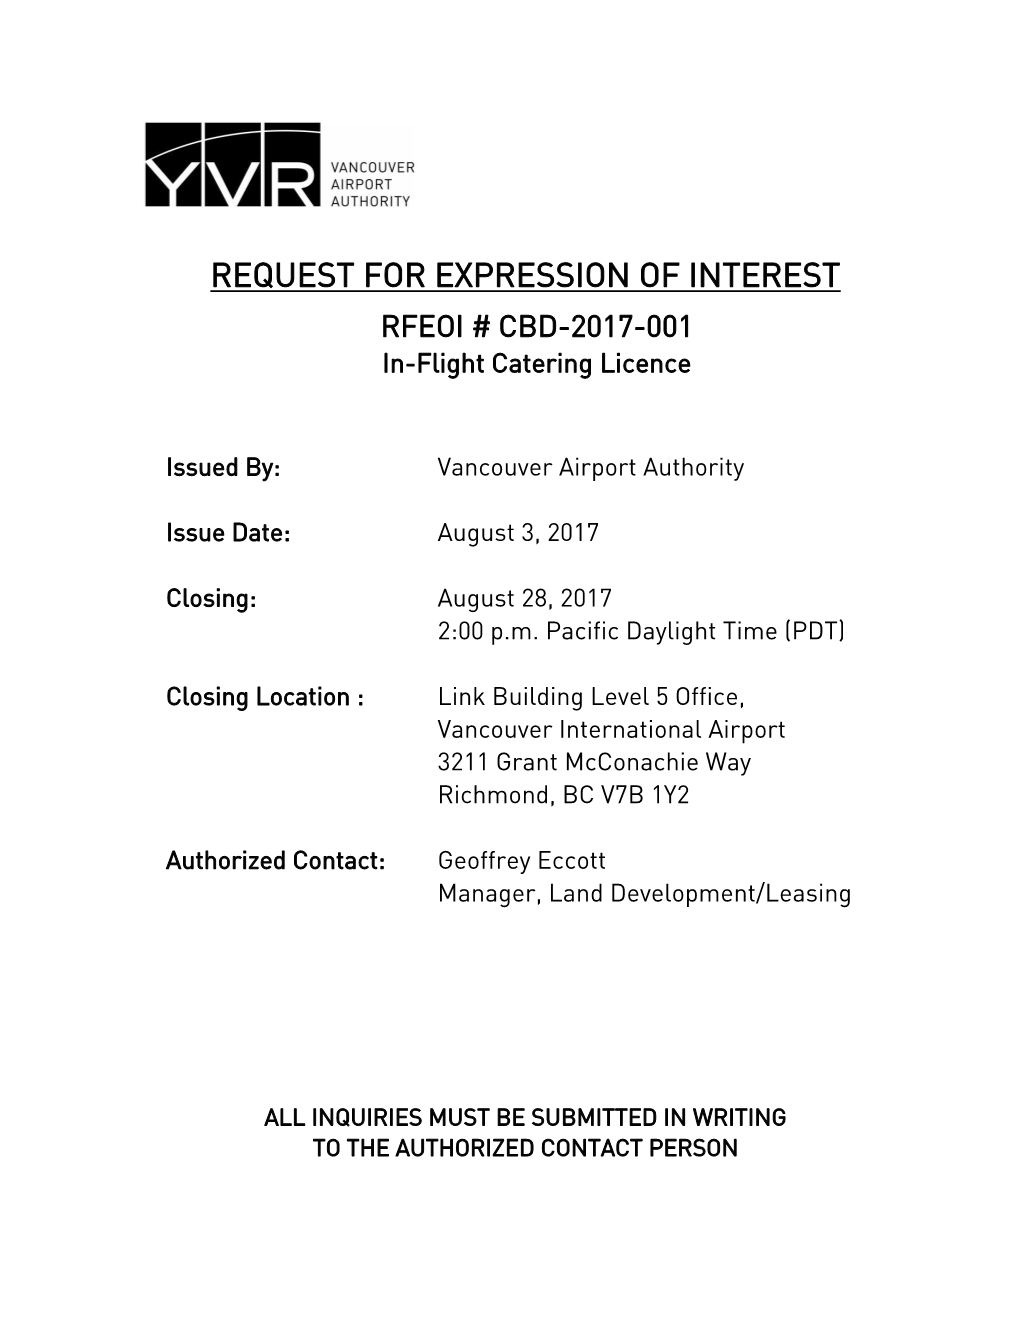 REQUEST for EXPRESSION of INTEREST RFEOI # CBD-2017-001 In-Flight Catering Licence